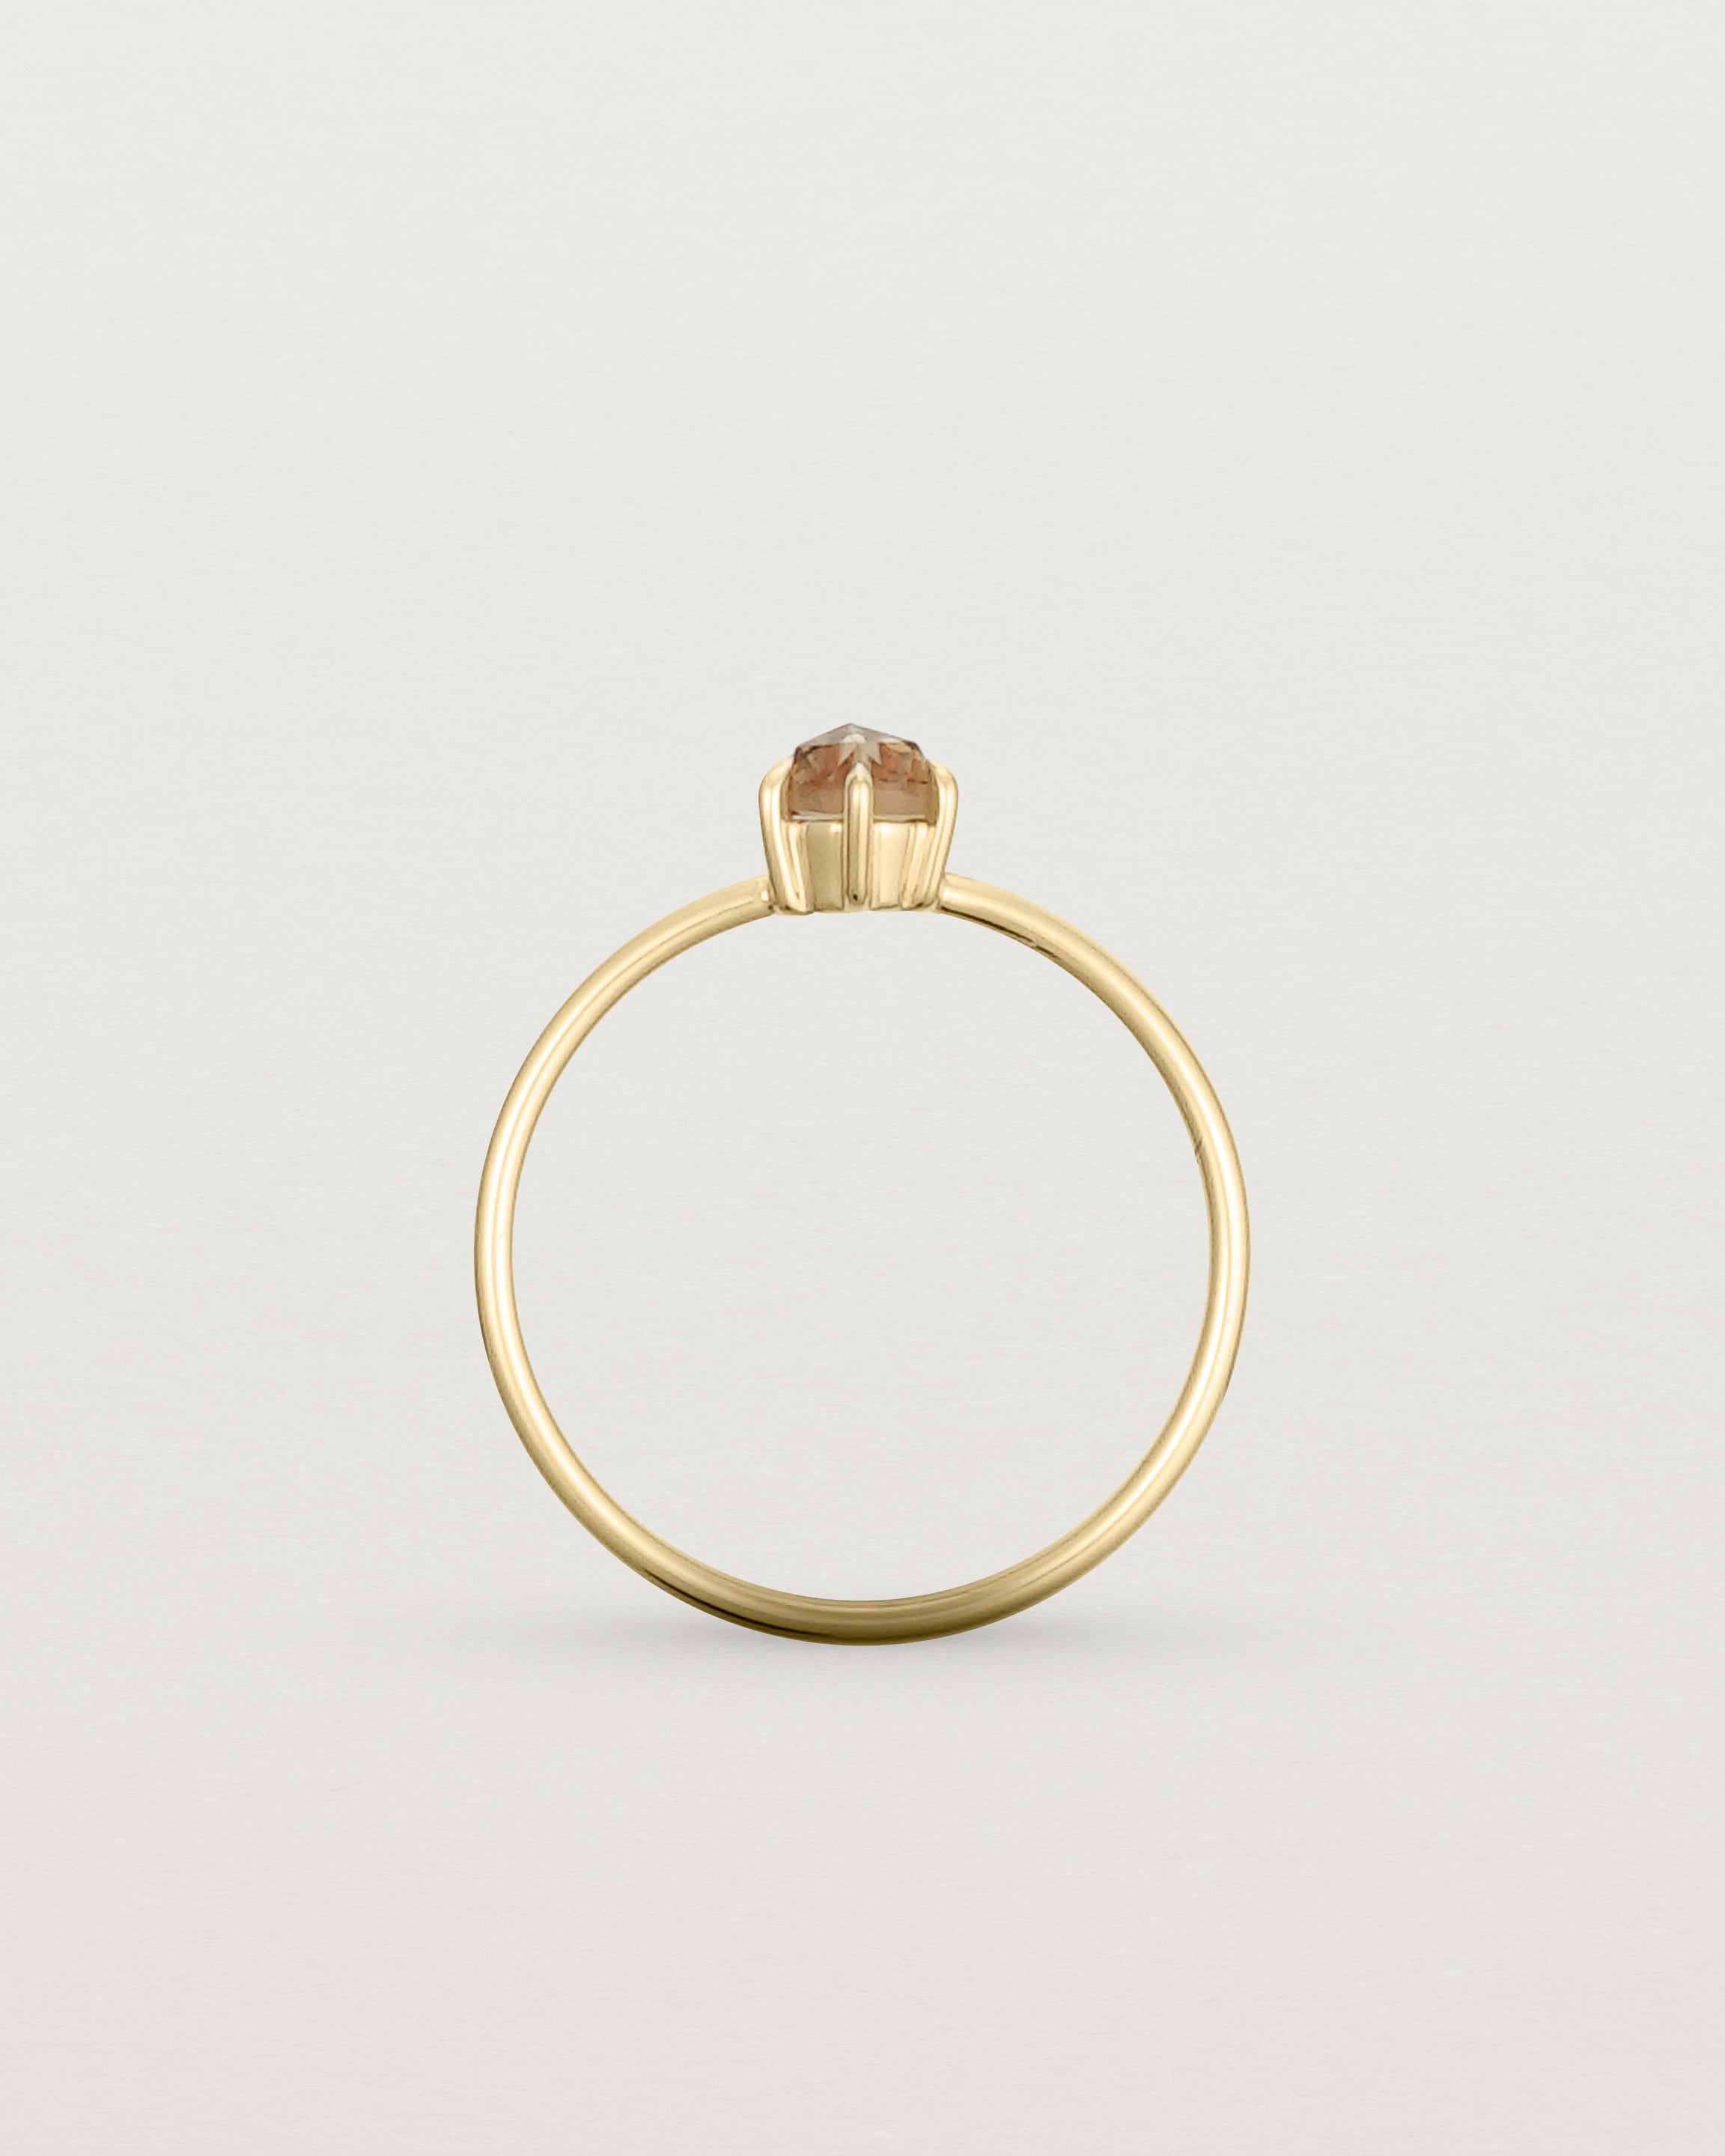 Standing view of the Tiny Rose Cut Ring | Honey Quartz | Yellow Gold.